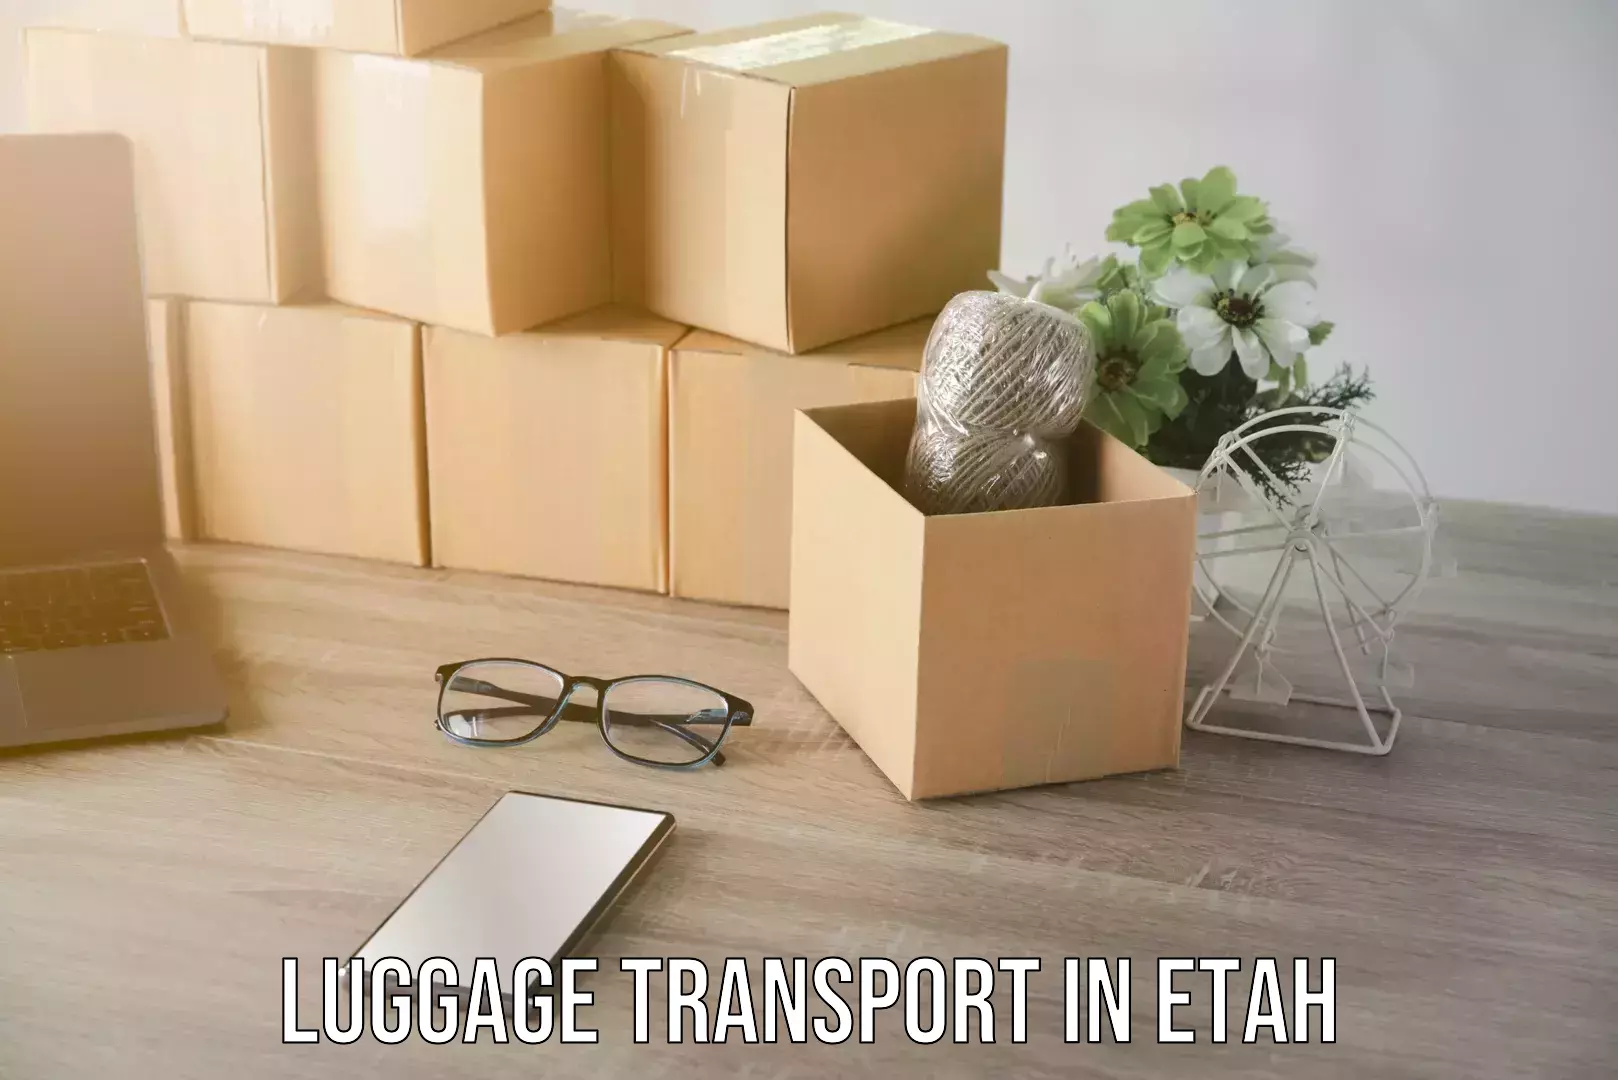 Express luggage delivery in Etah